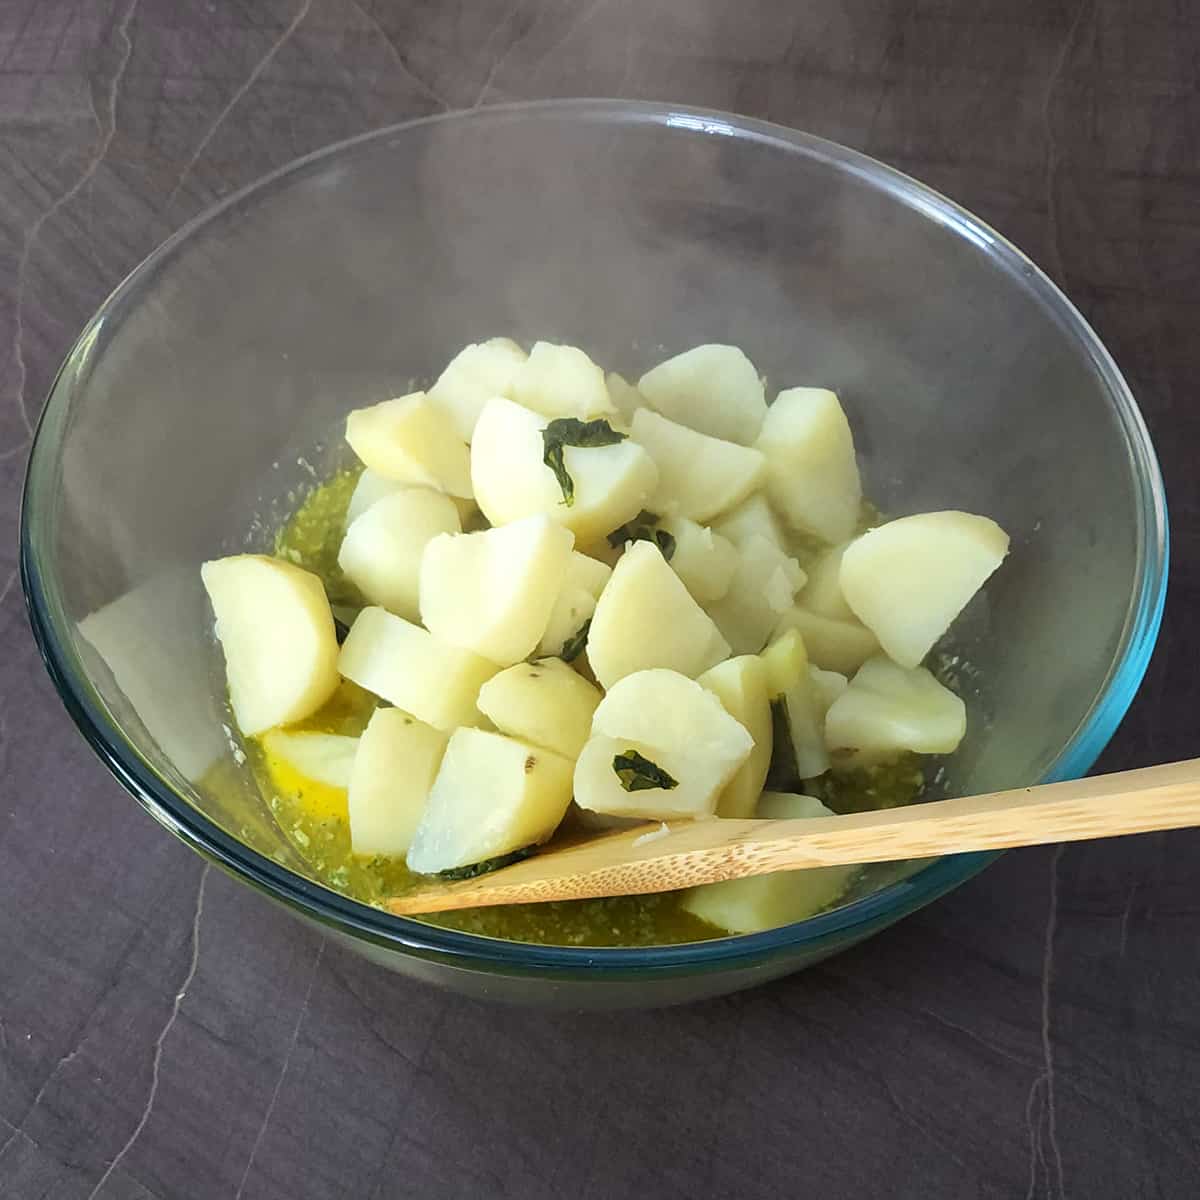 Add boiled and drained potatoes.